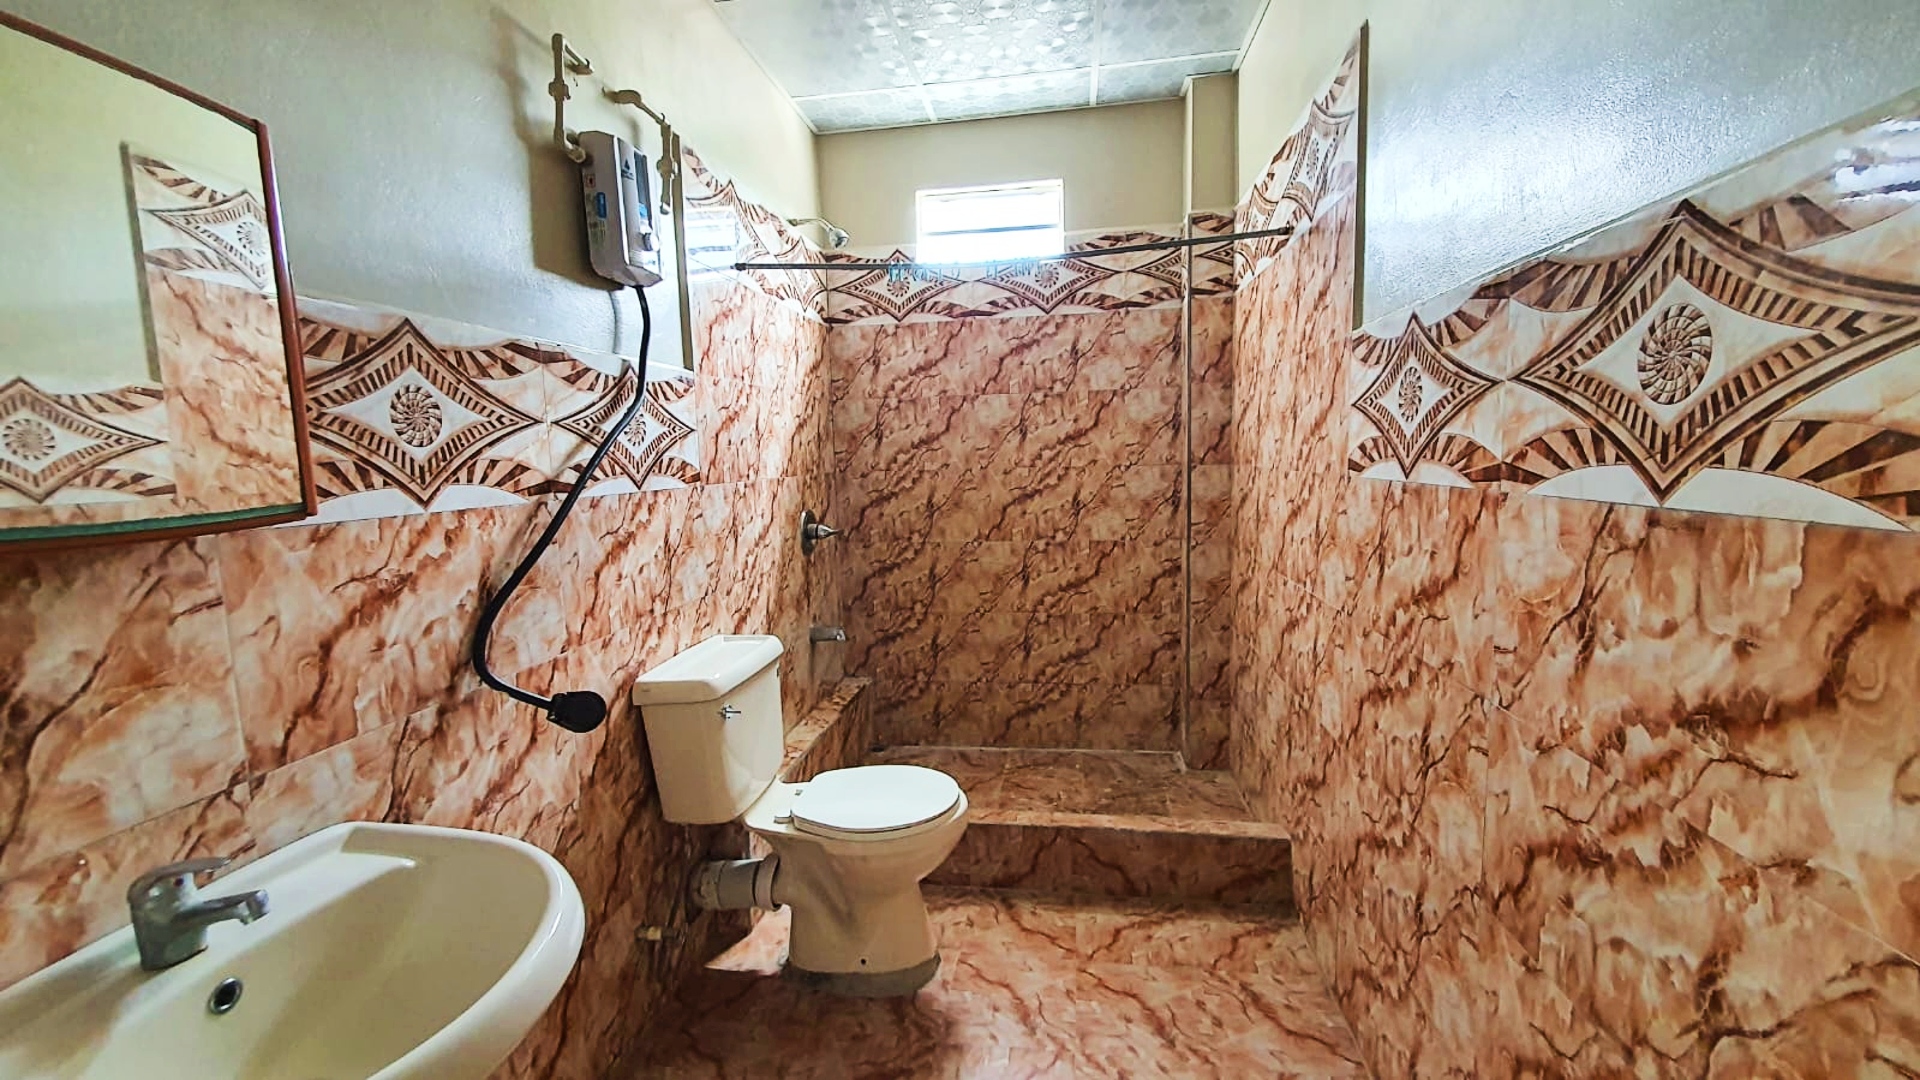 Bathroom with toilet, sink, and shower with enclosure.